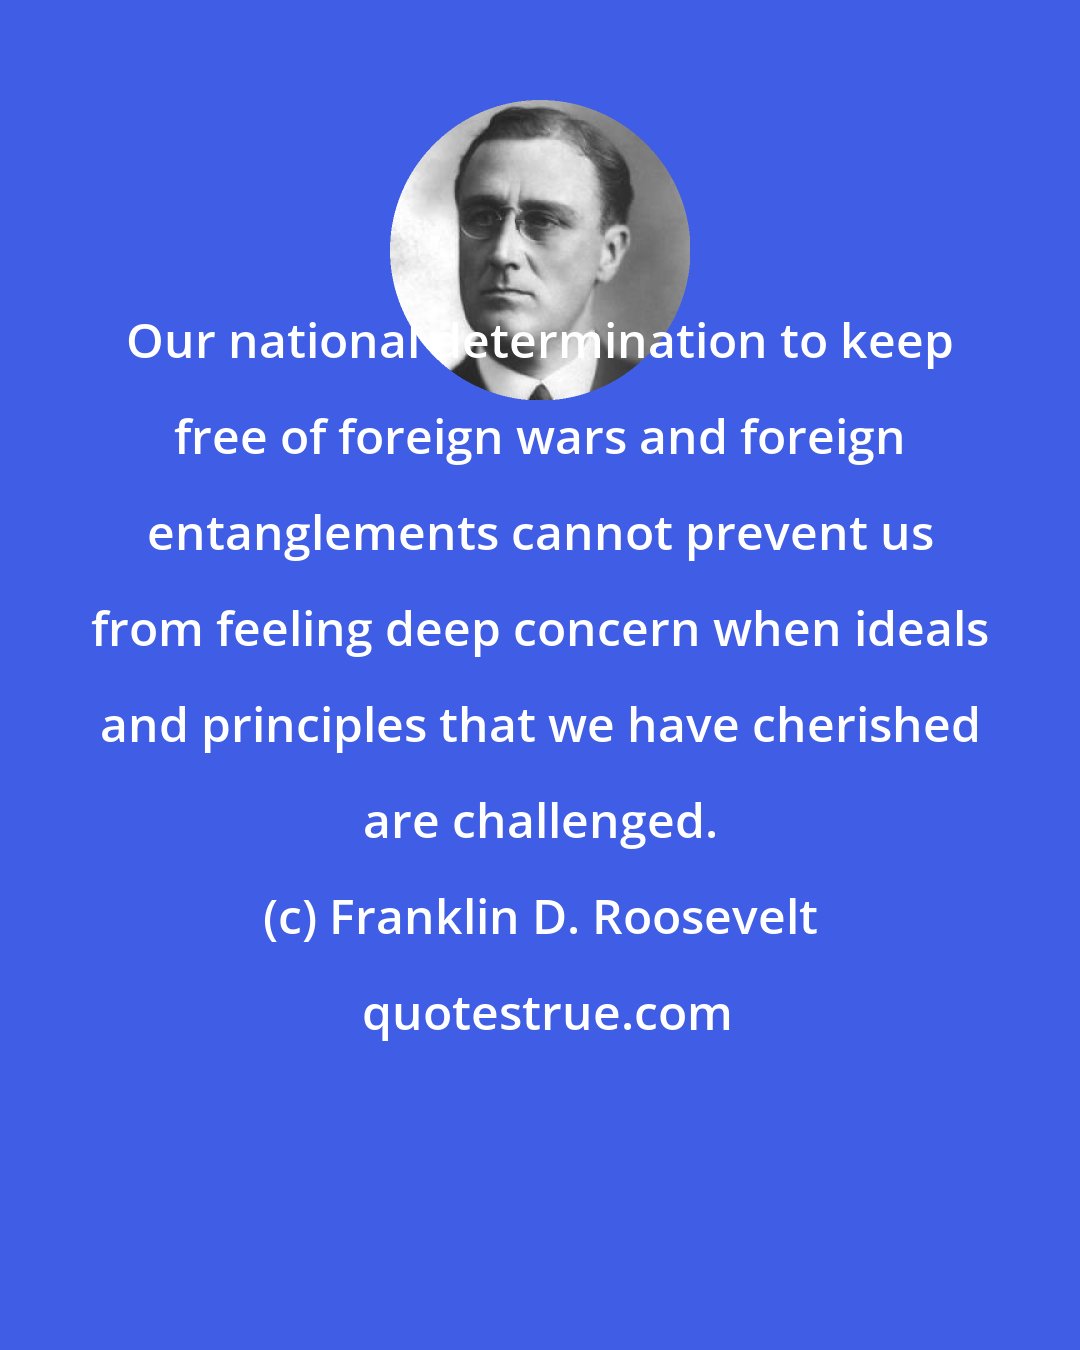 Franklin D. Roosevelt: Our national determination to keep free of foreign wars and foreign entanglements cannot prevent us from feeling deep concern when ideals and principles that we have cherished are challenged.